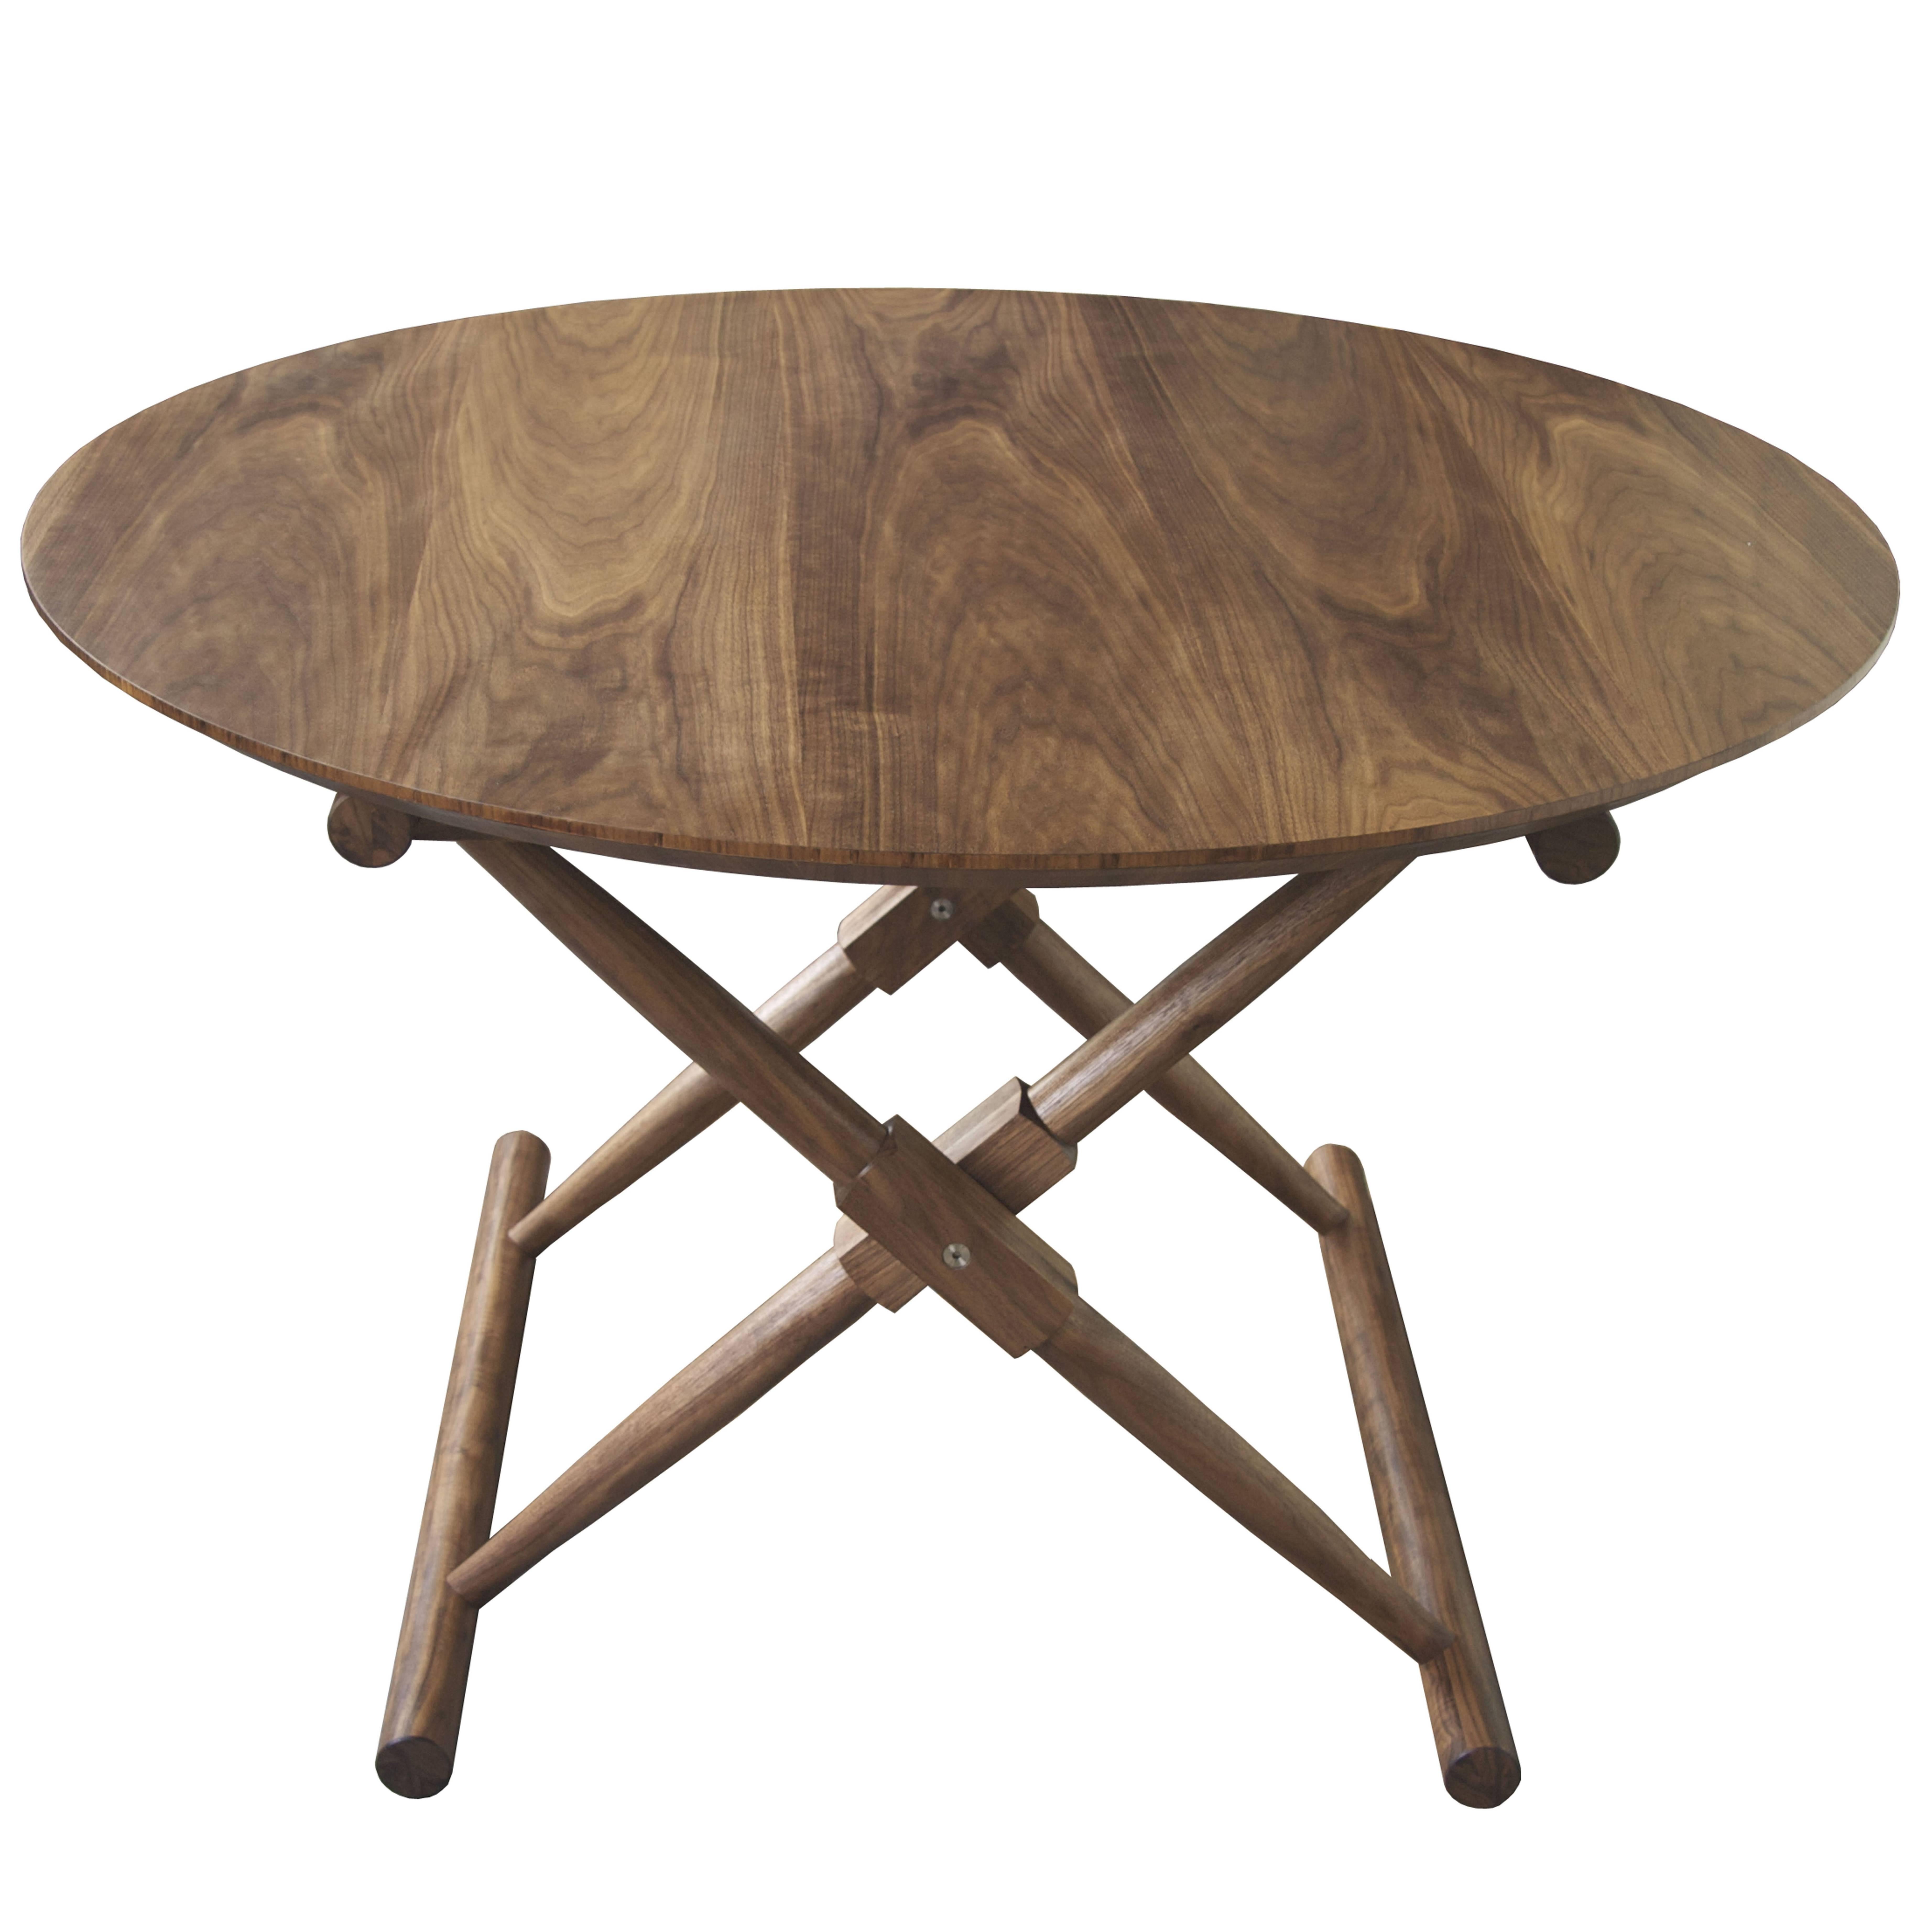 Matthiessen Round Dining Table - handcrafted by Richard Wrightman Design